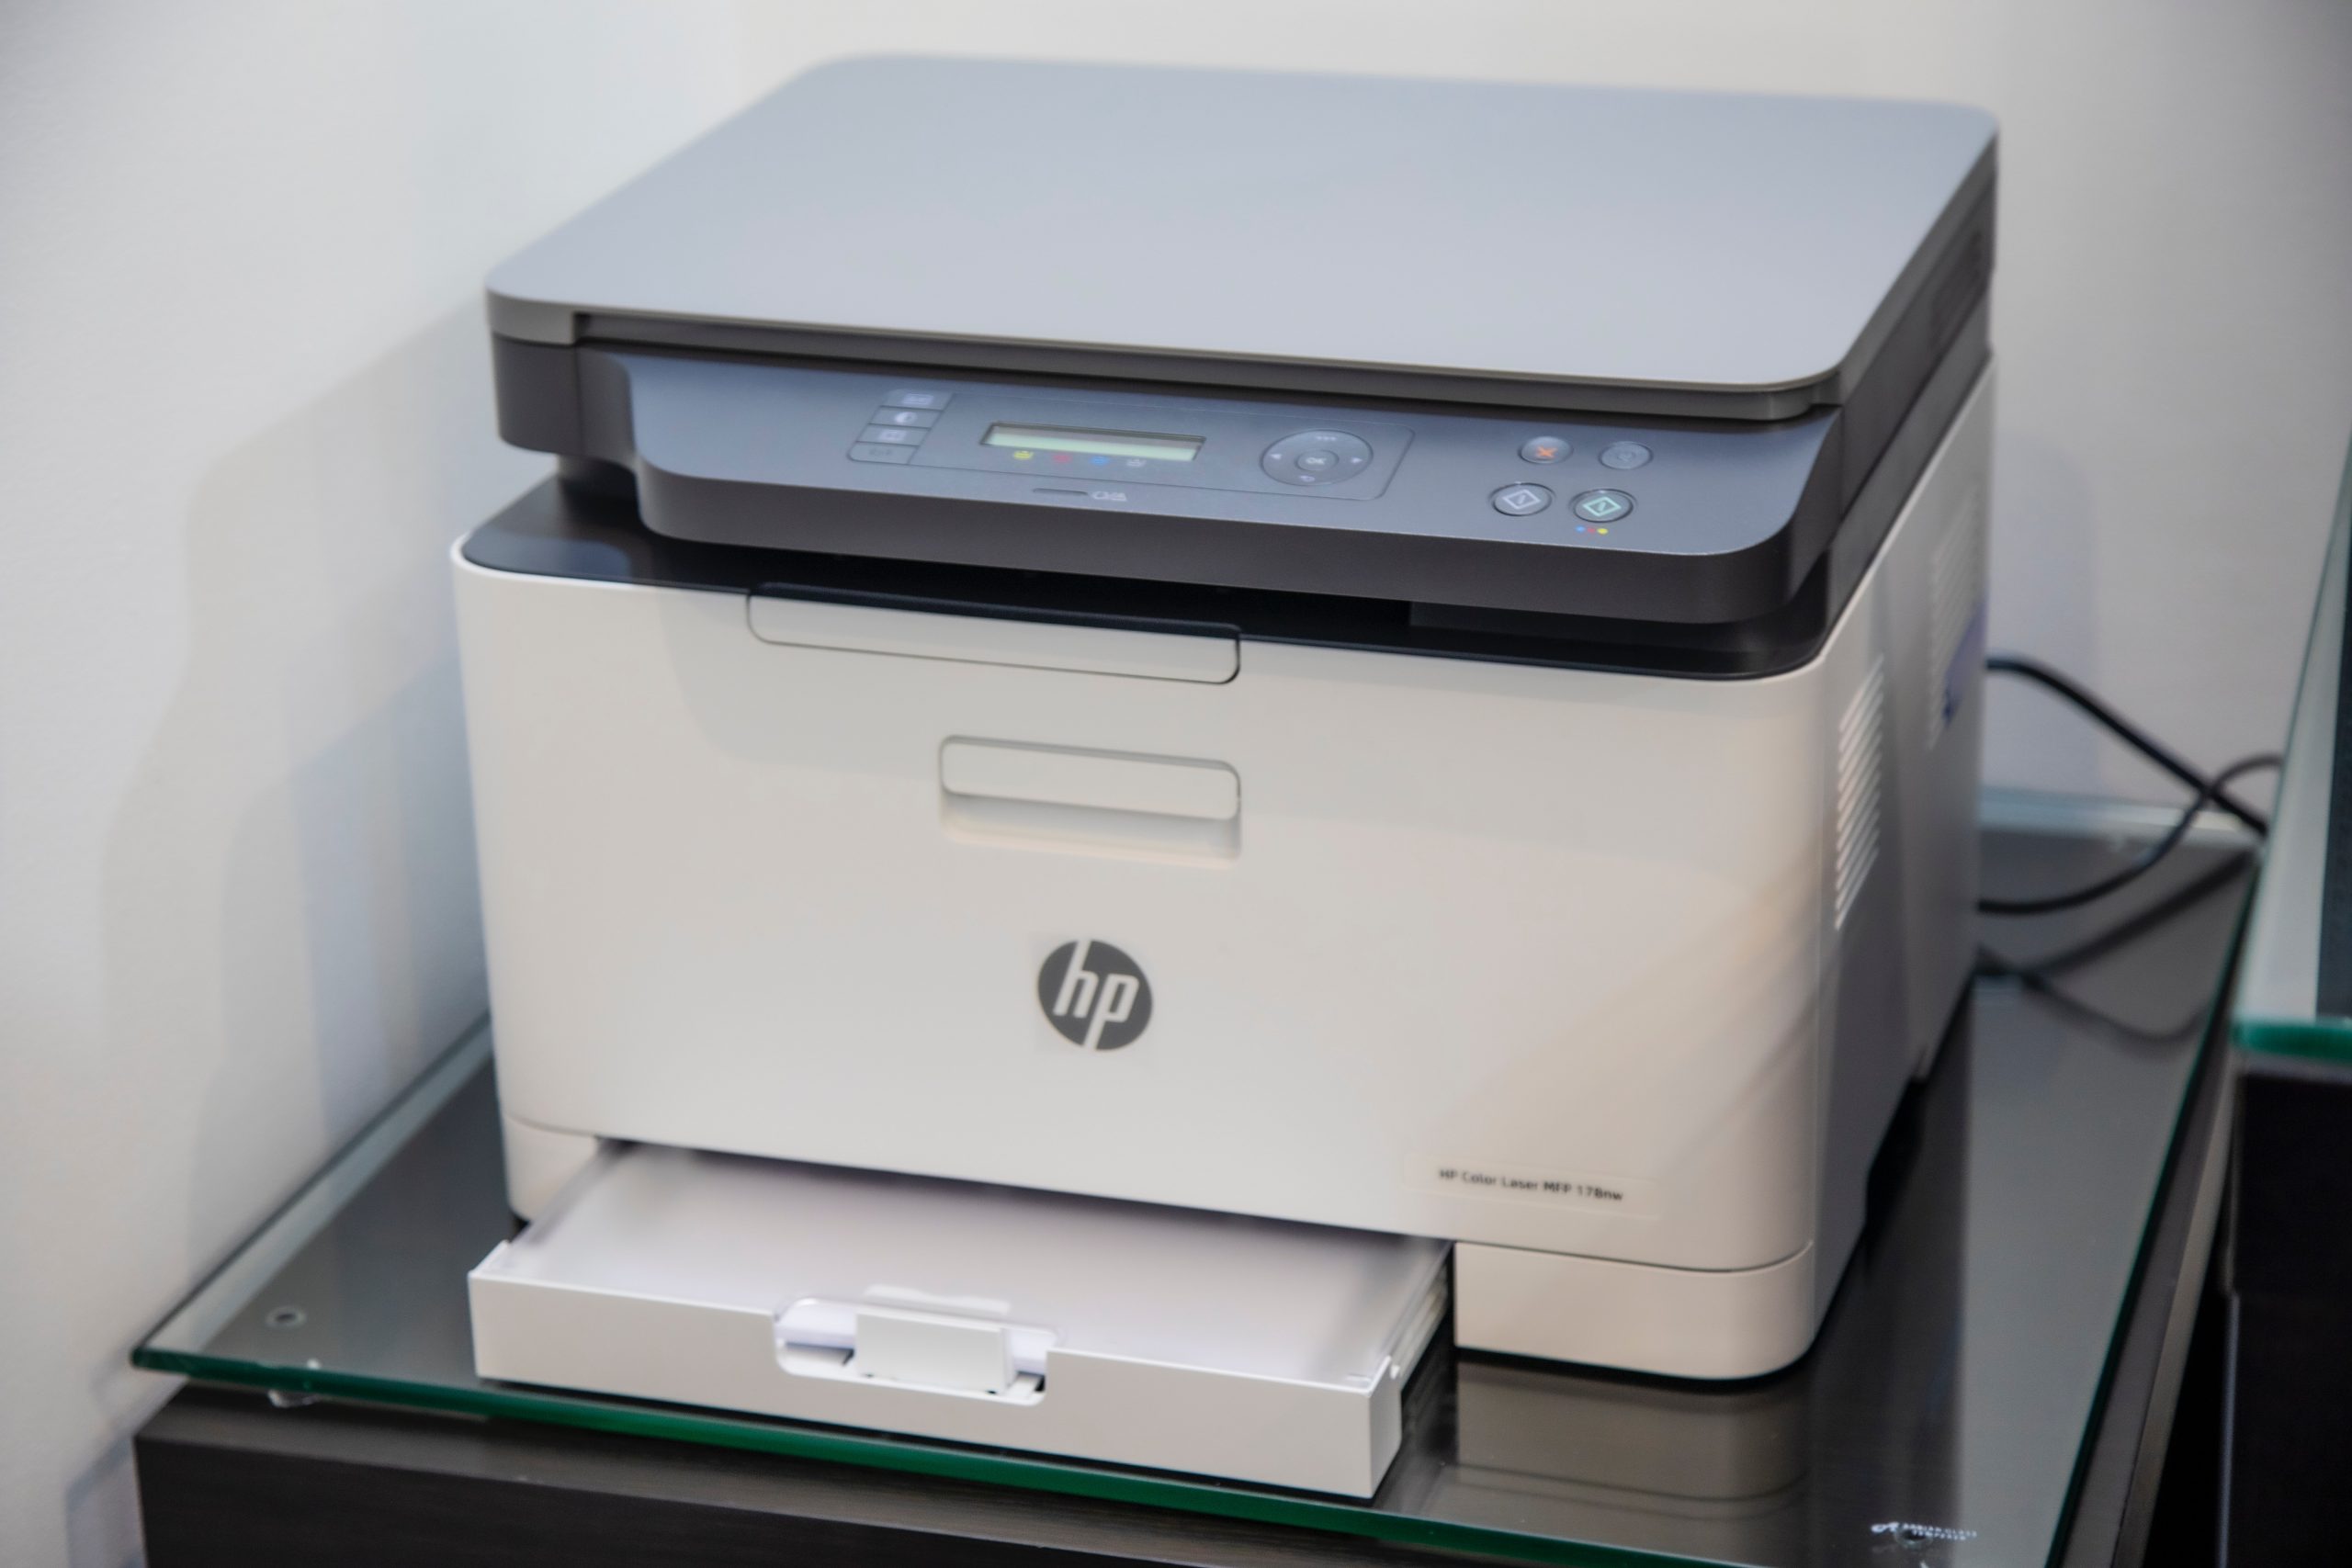 A white HP printer sits on a glasstop table.